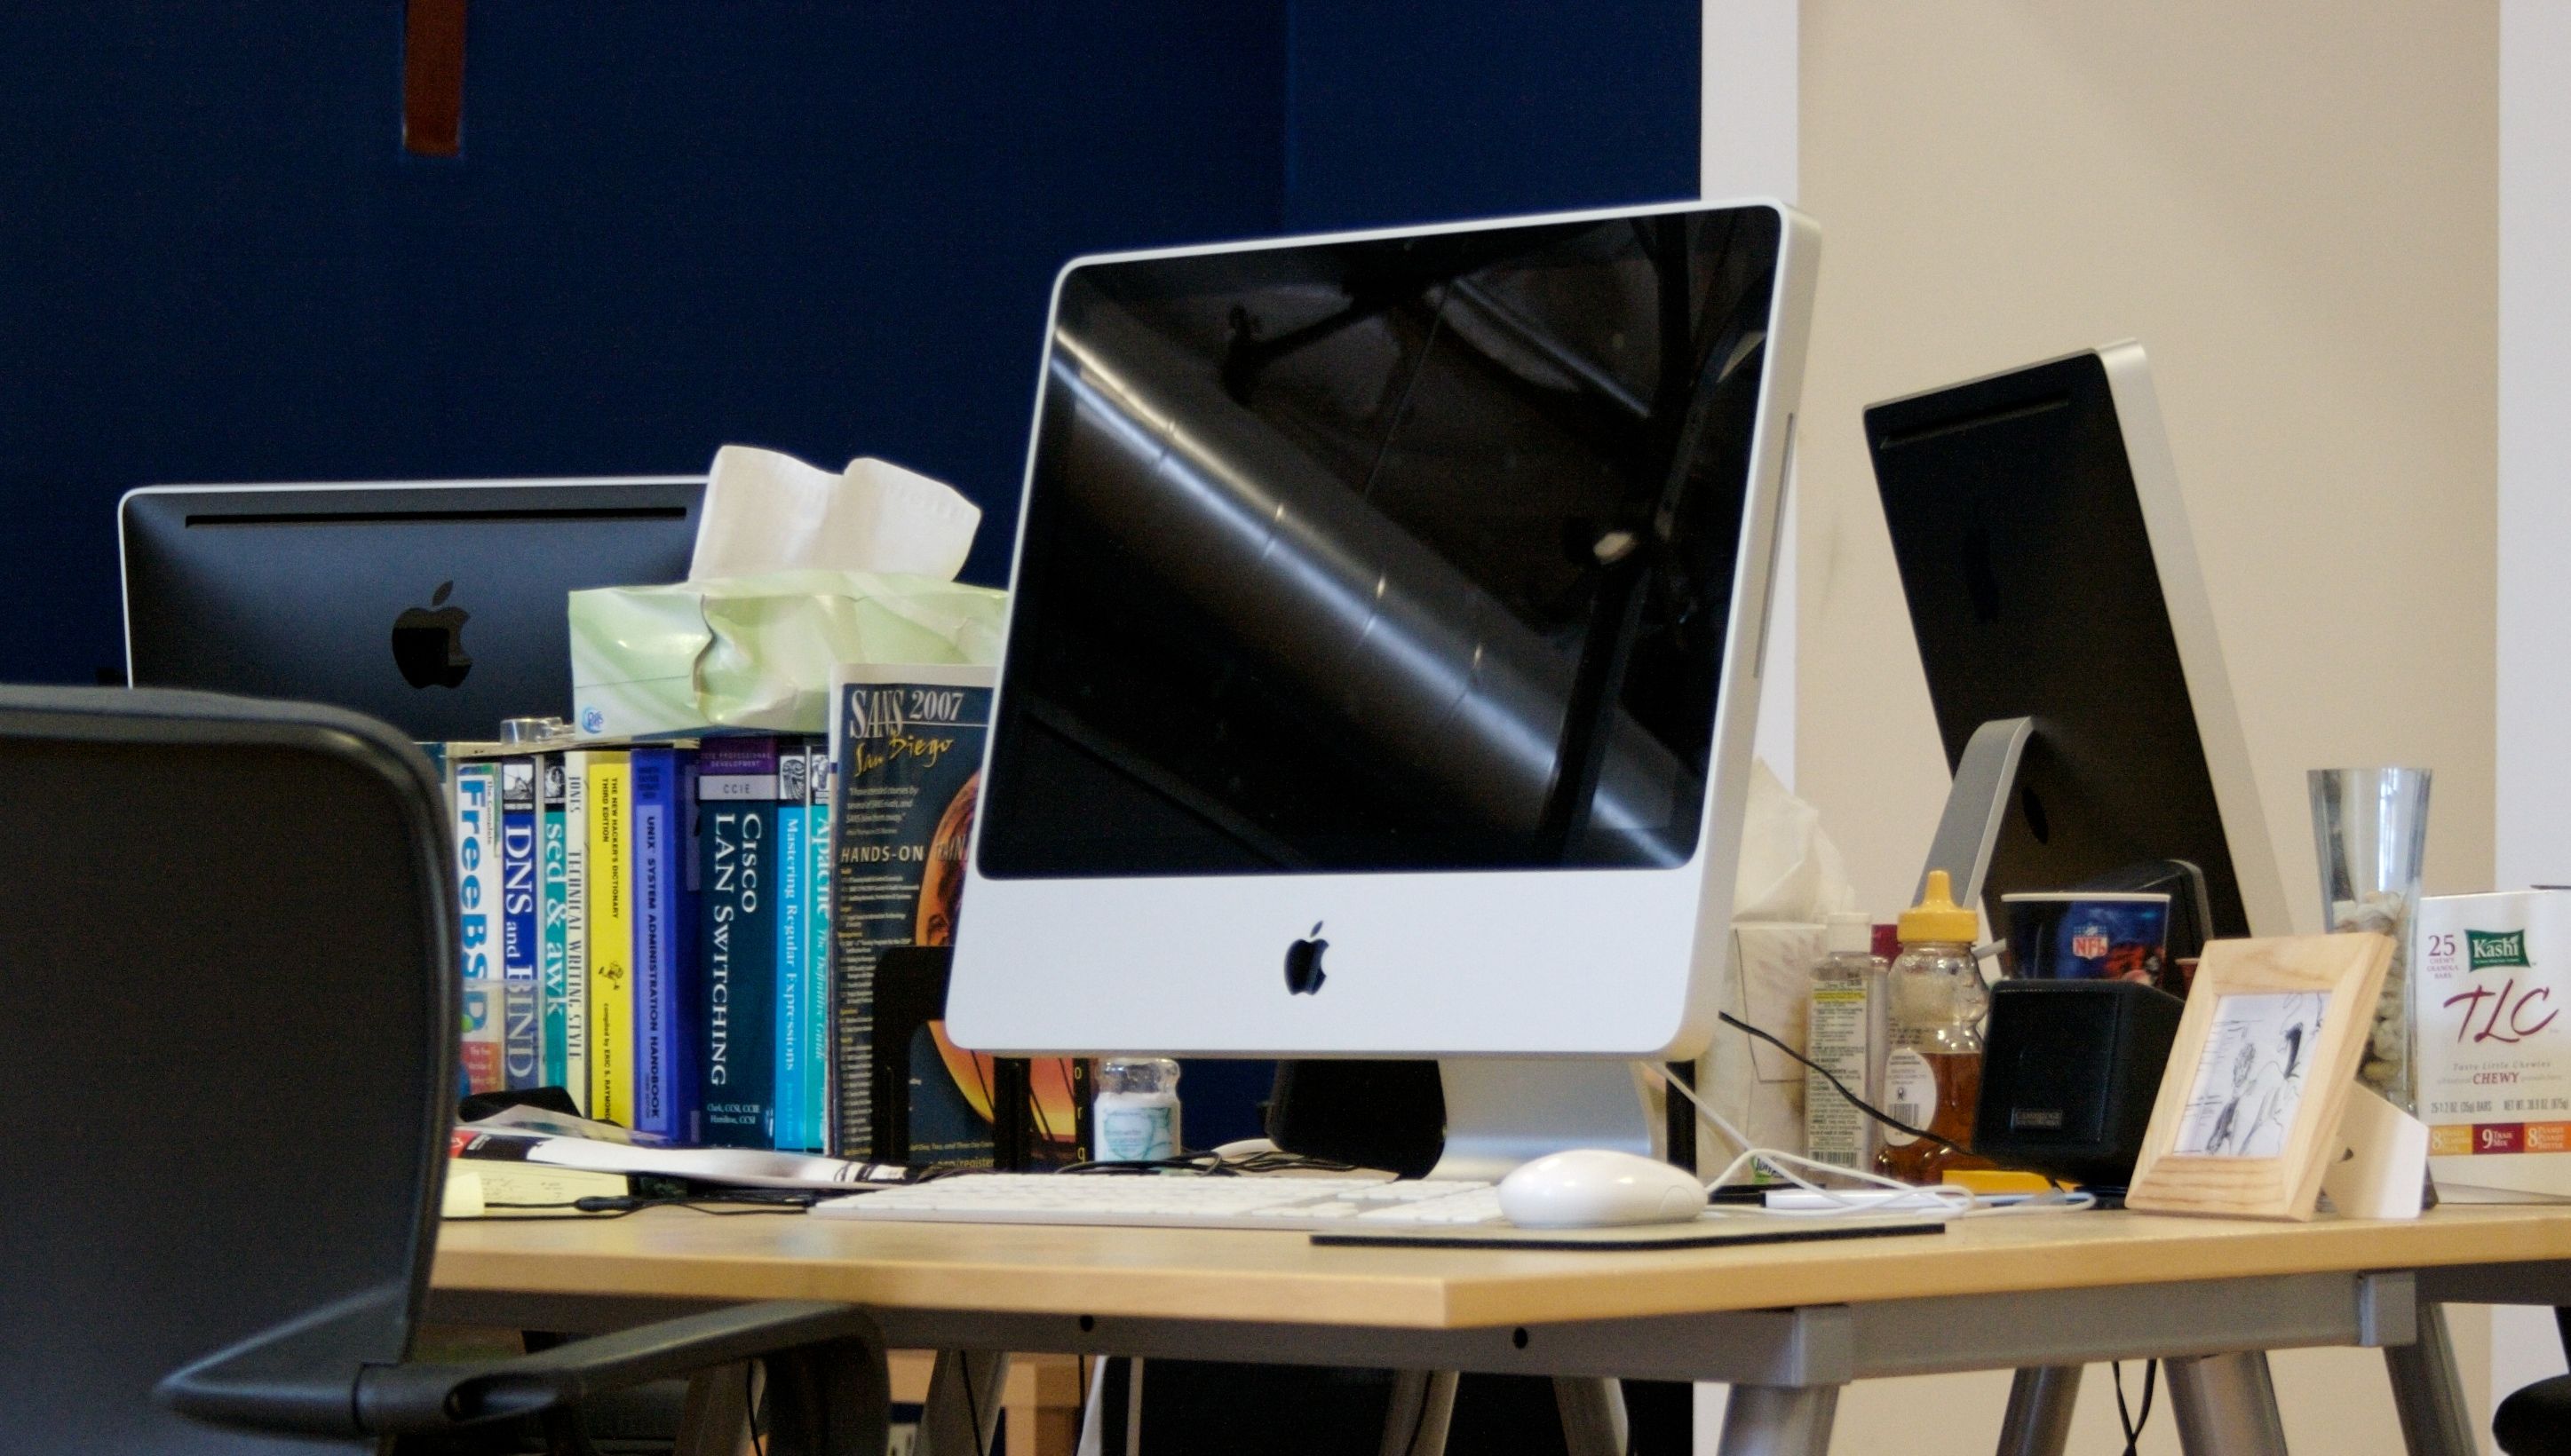 A 2008 Aluminum body iMac sits on a desk with other items